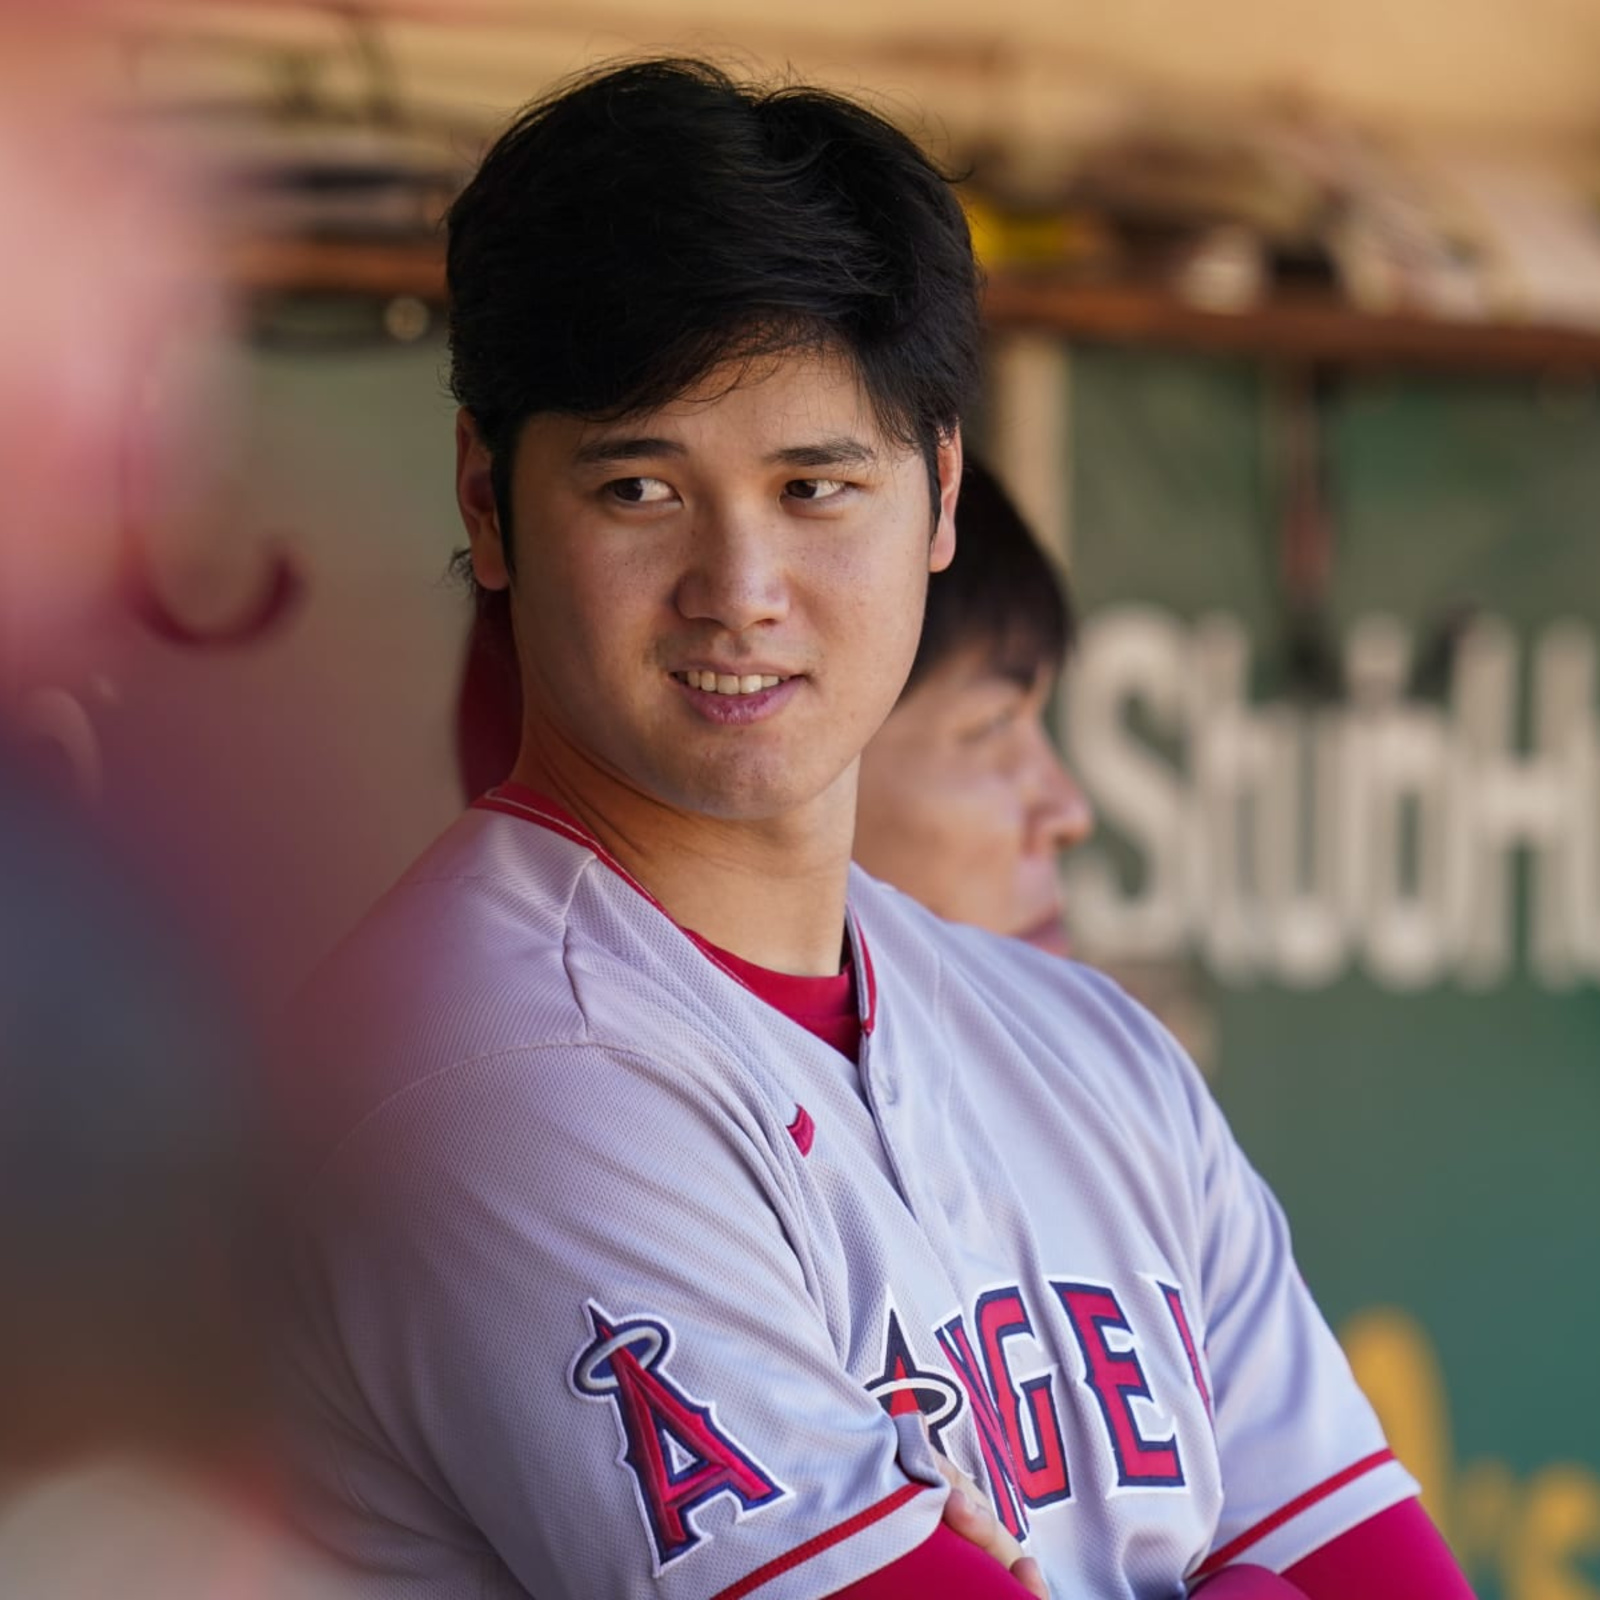 Fan favorite Shohei Ohtani tired of losing, vague on free agency